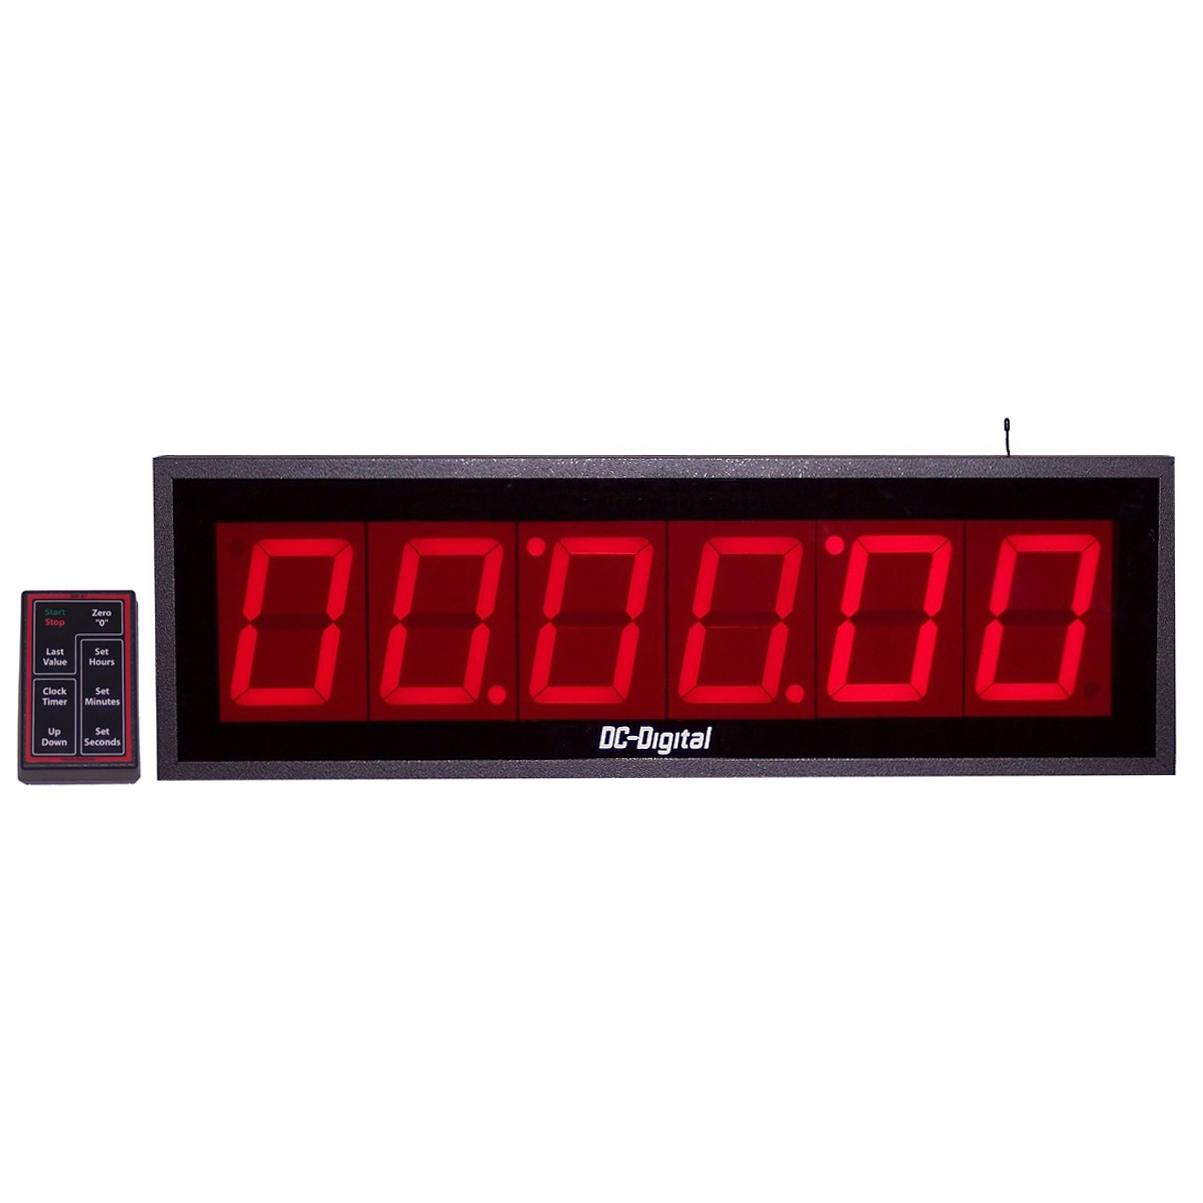 (DC-406UTW) 4.0 Inch LED, RF-Wireless Controlled, Count Up, Countdown Timer, Time-of-Day Clock, Hours, Minutes, Seconds